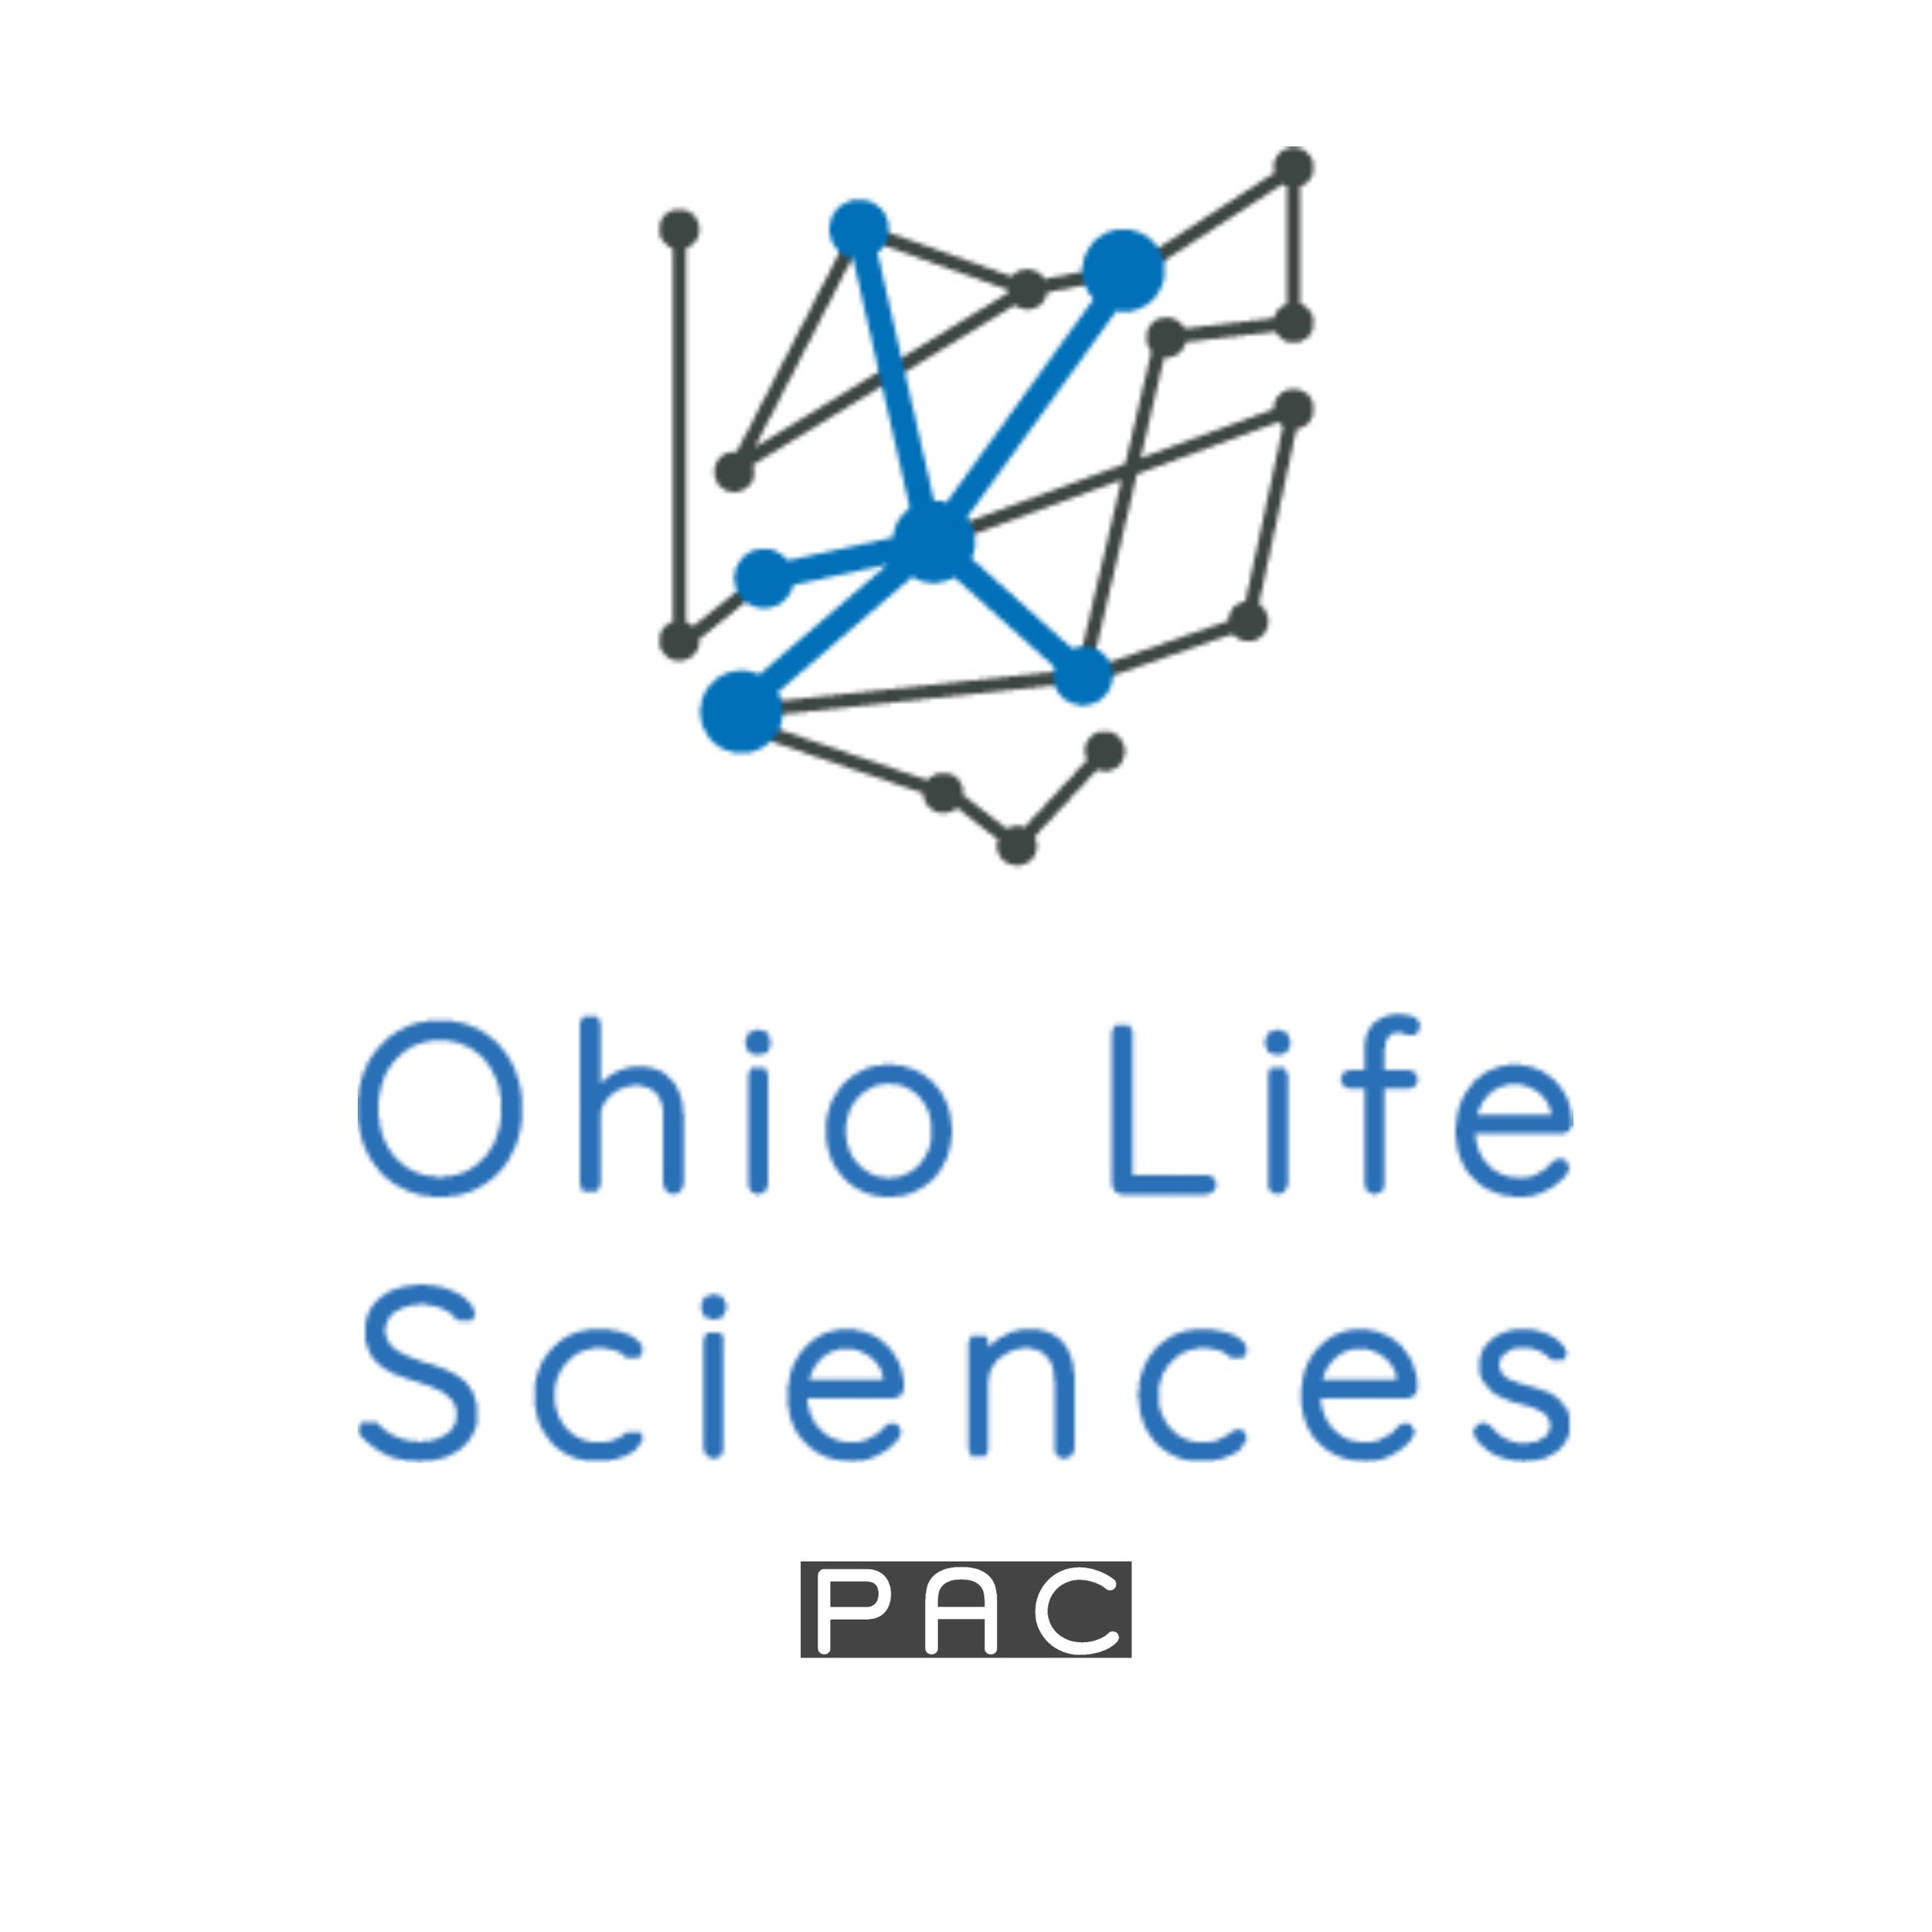 Ohio-Life-Sciences_stacked_blue-gray PAC.jpg